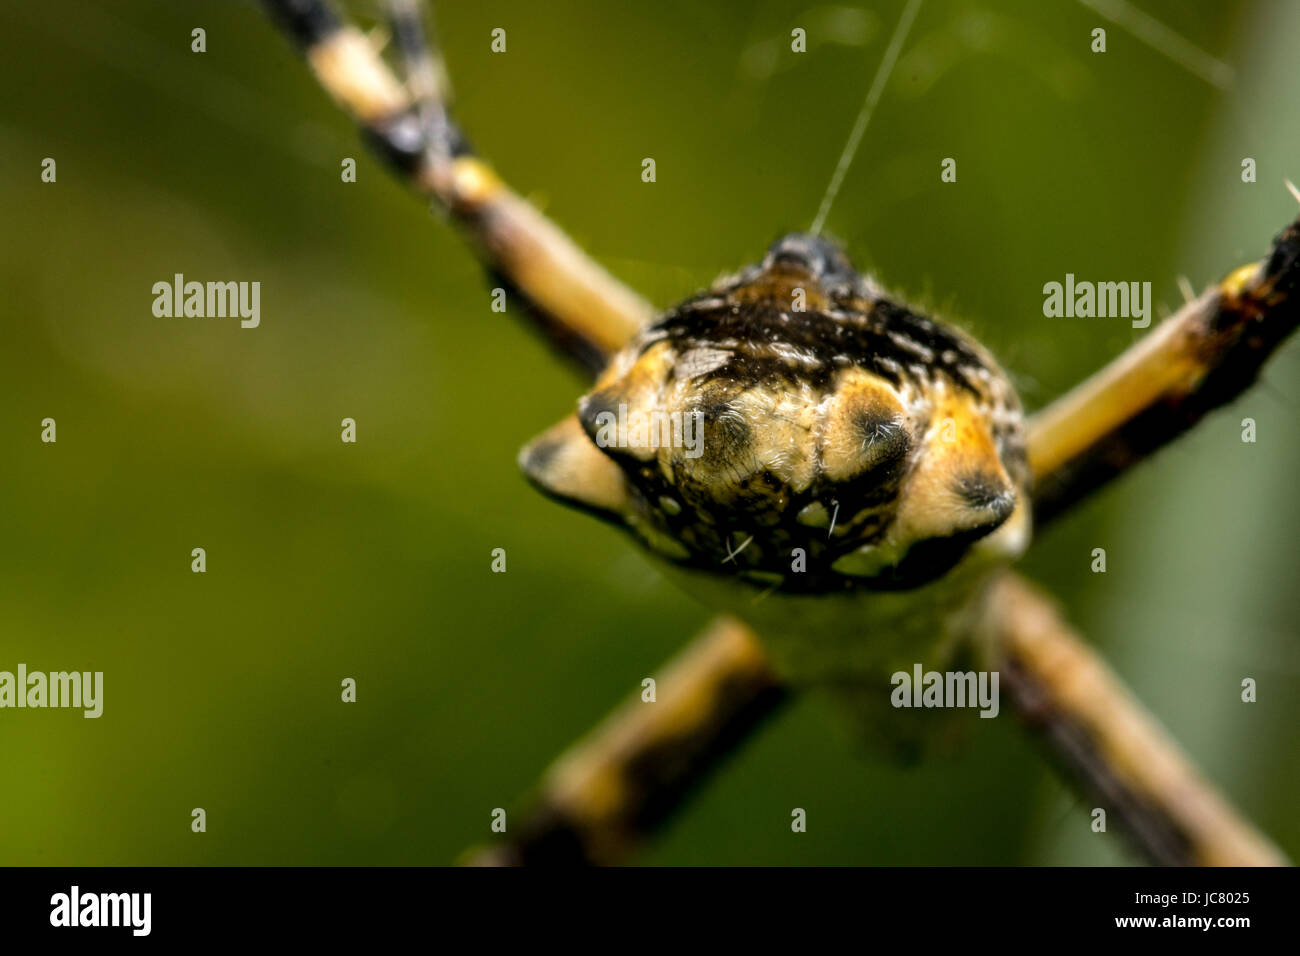 Big spider waiting for prey on its web Stock Photo